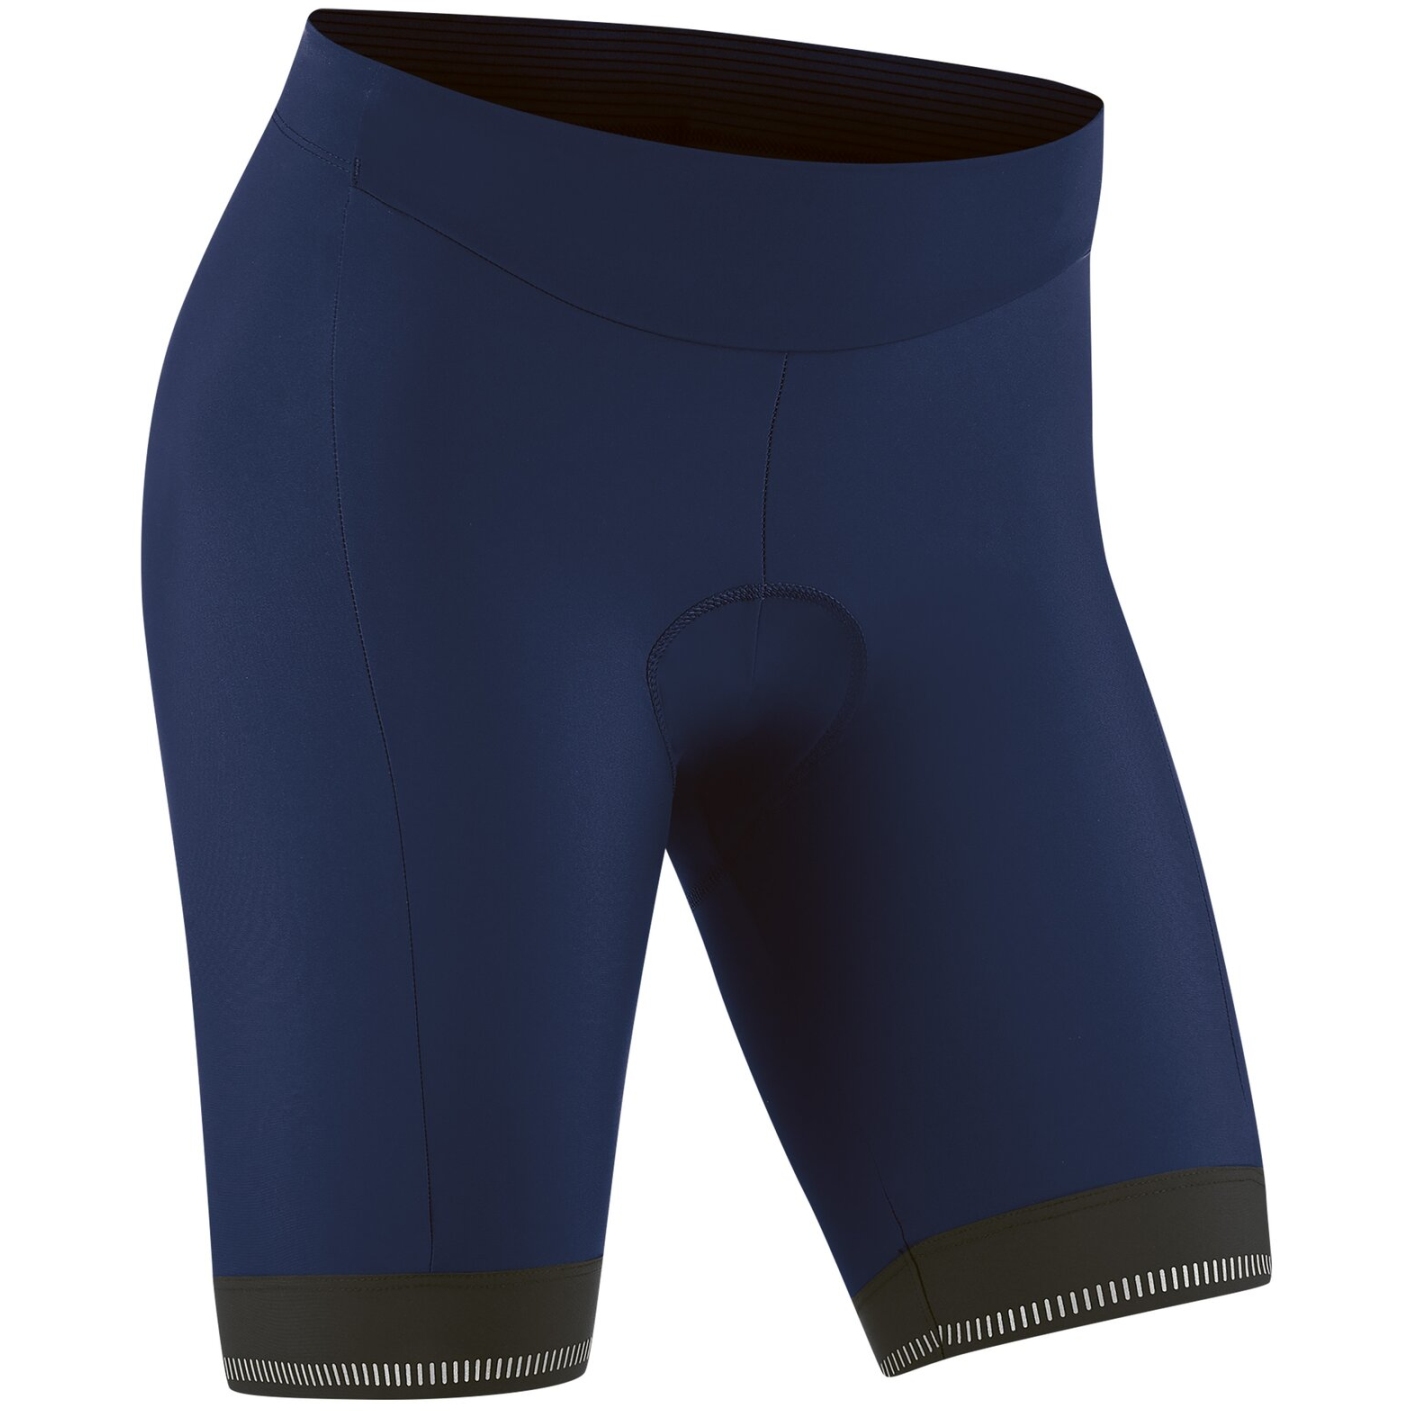 Foto de Gonso Culotte Ciclismo Mujer - SITIVO Green - Navigation Navy